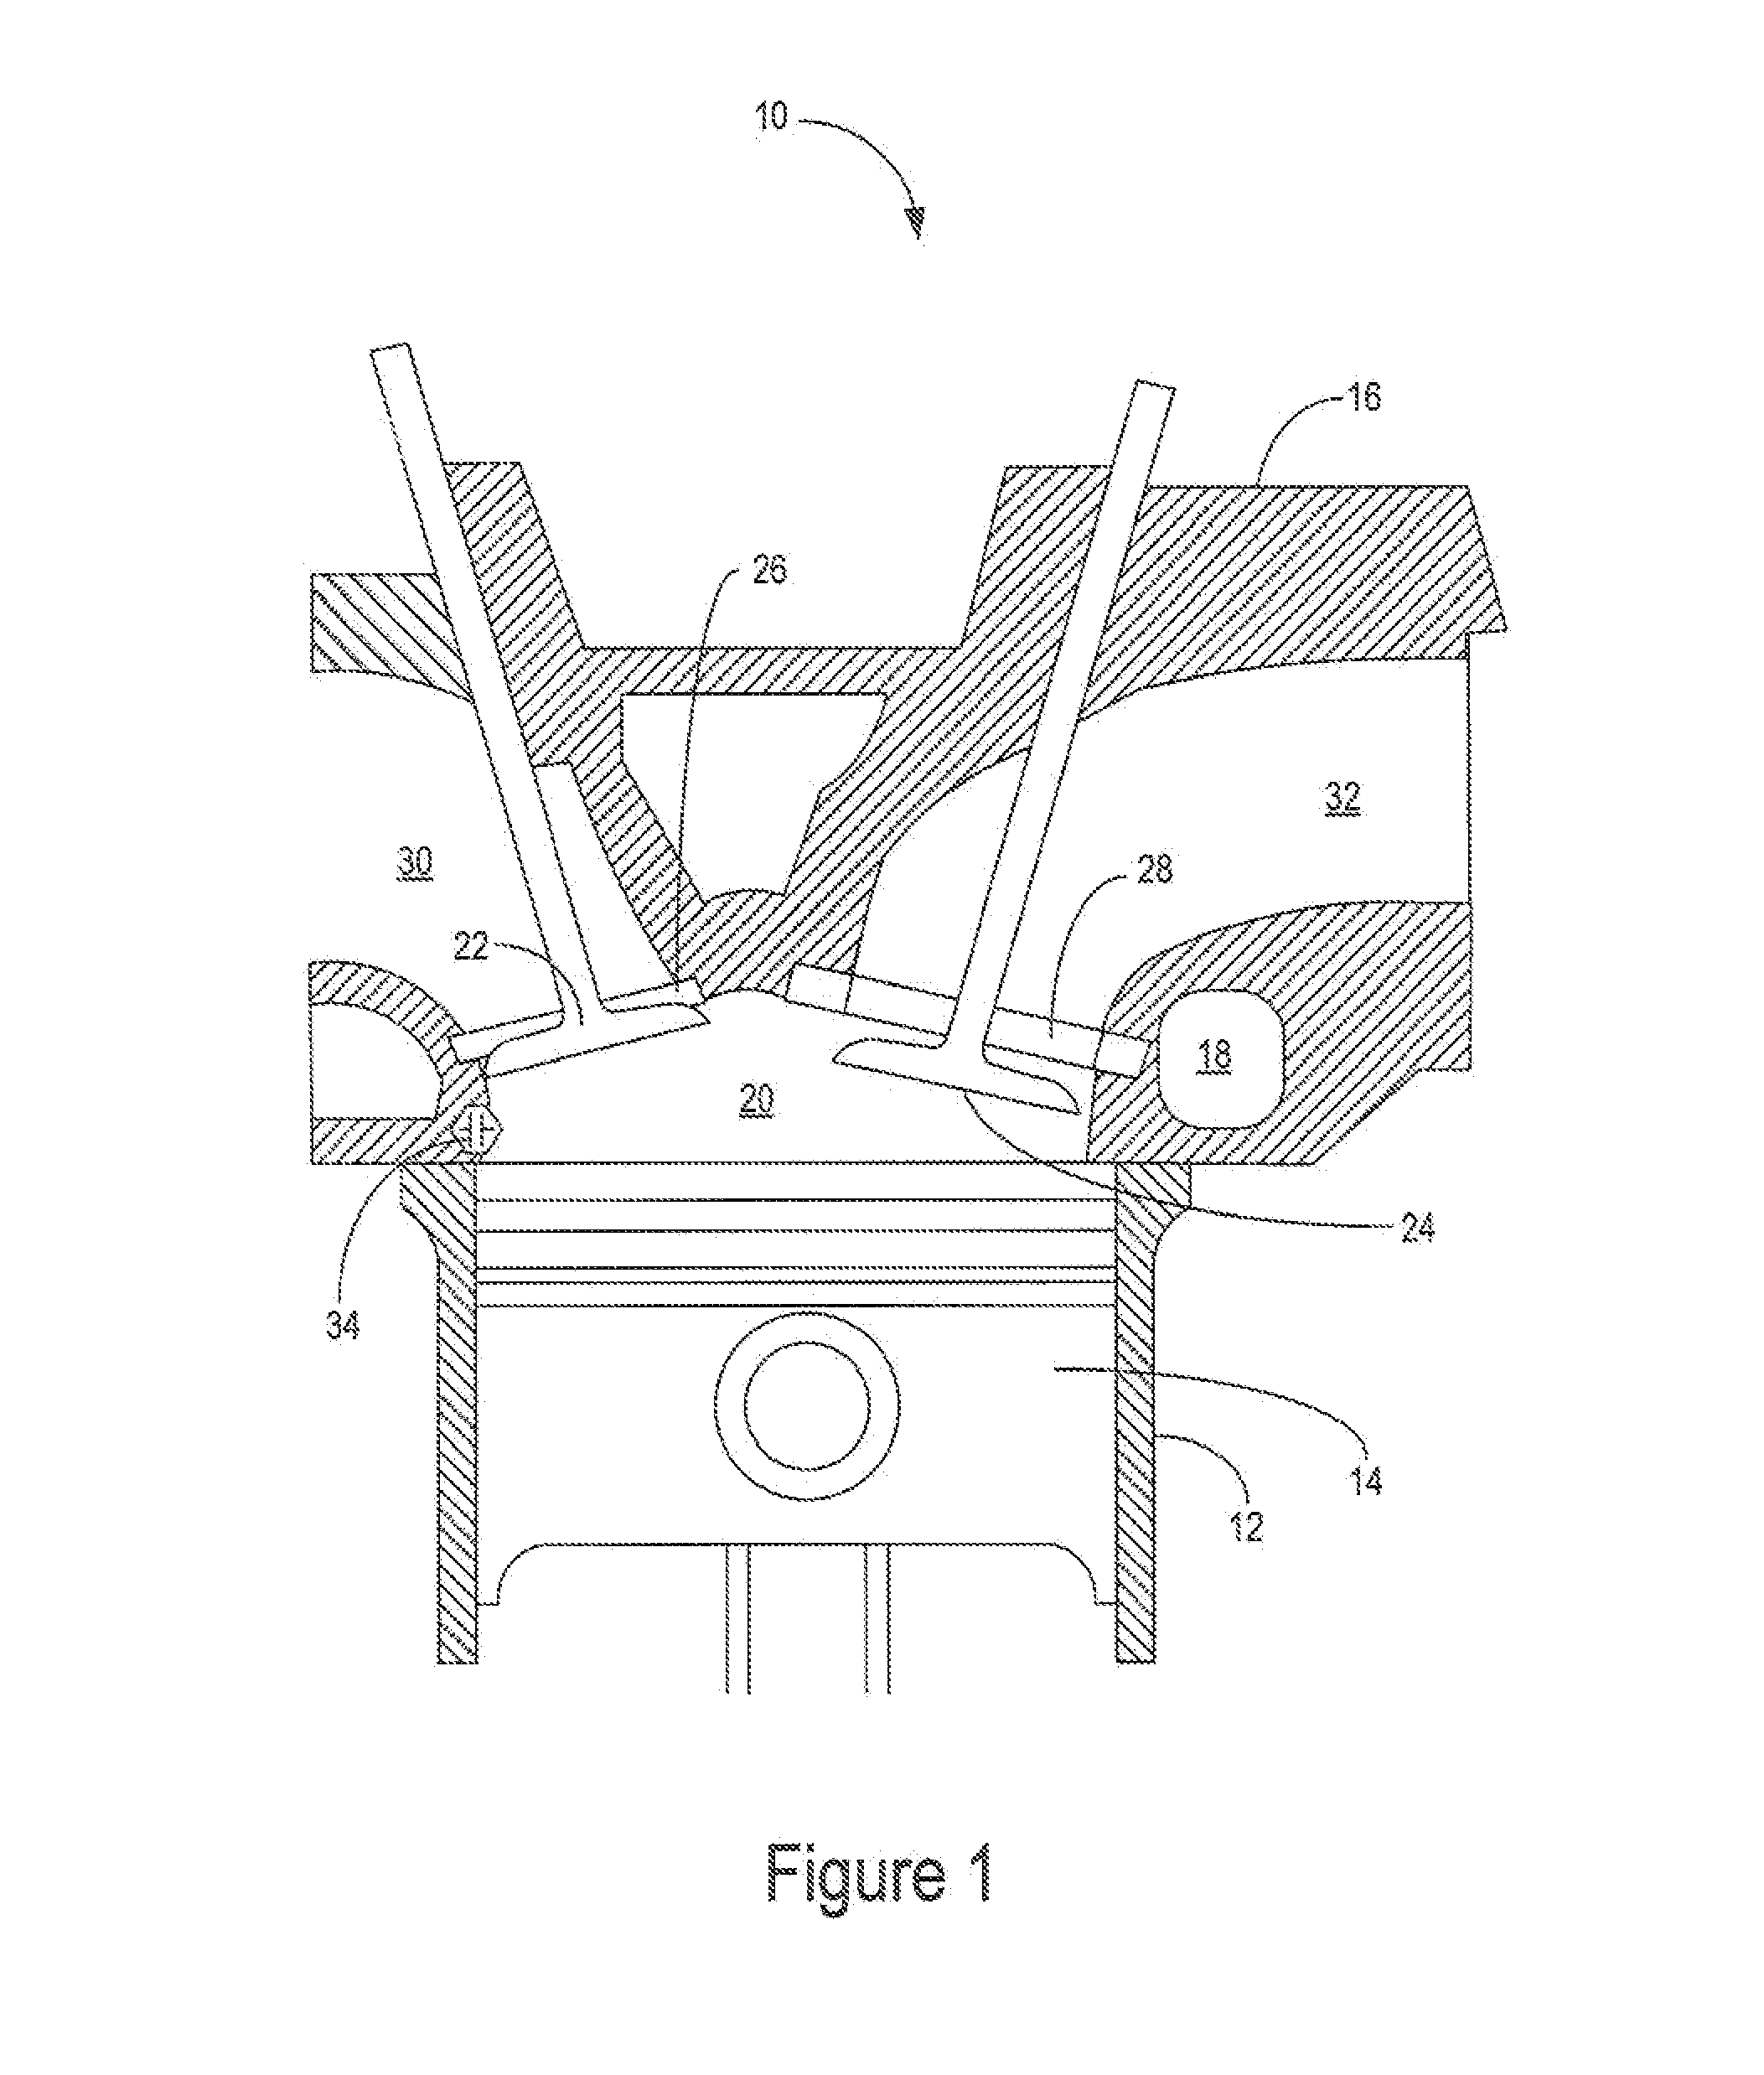 Systems and Methods to Control Torsional Vibration in an Internal Combustion Engine with Cylinder Deactivation